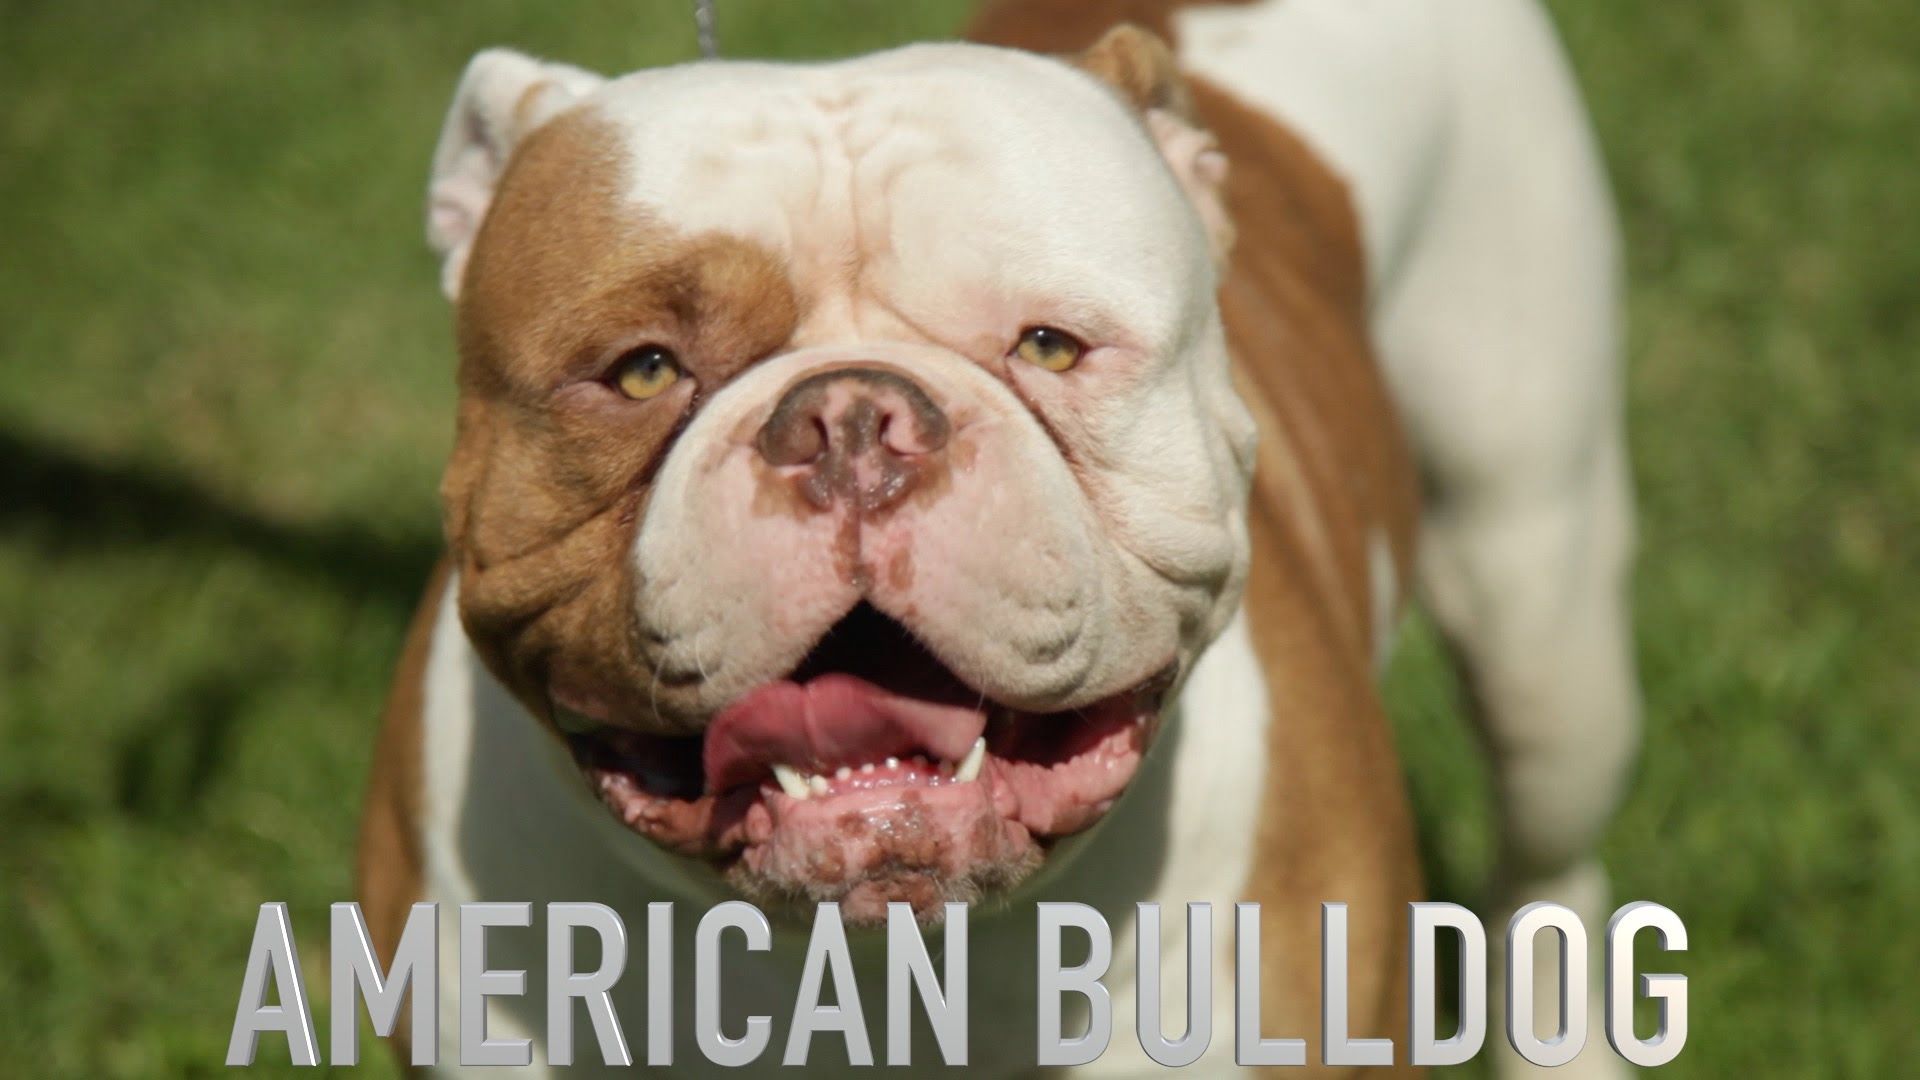 THE AMERICAN BULLDOG - A DOG LOVERS INTRODUCTION - YouTube